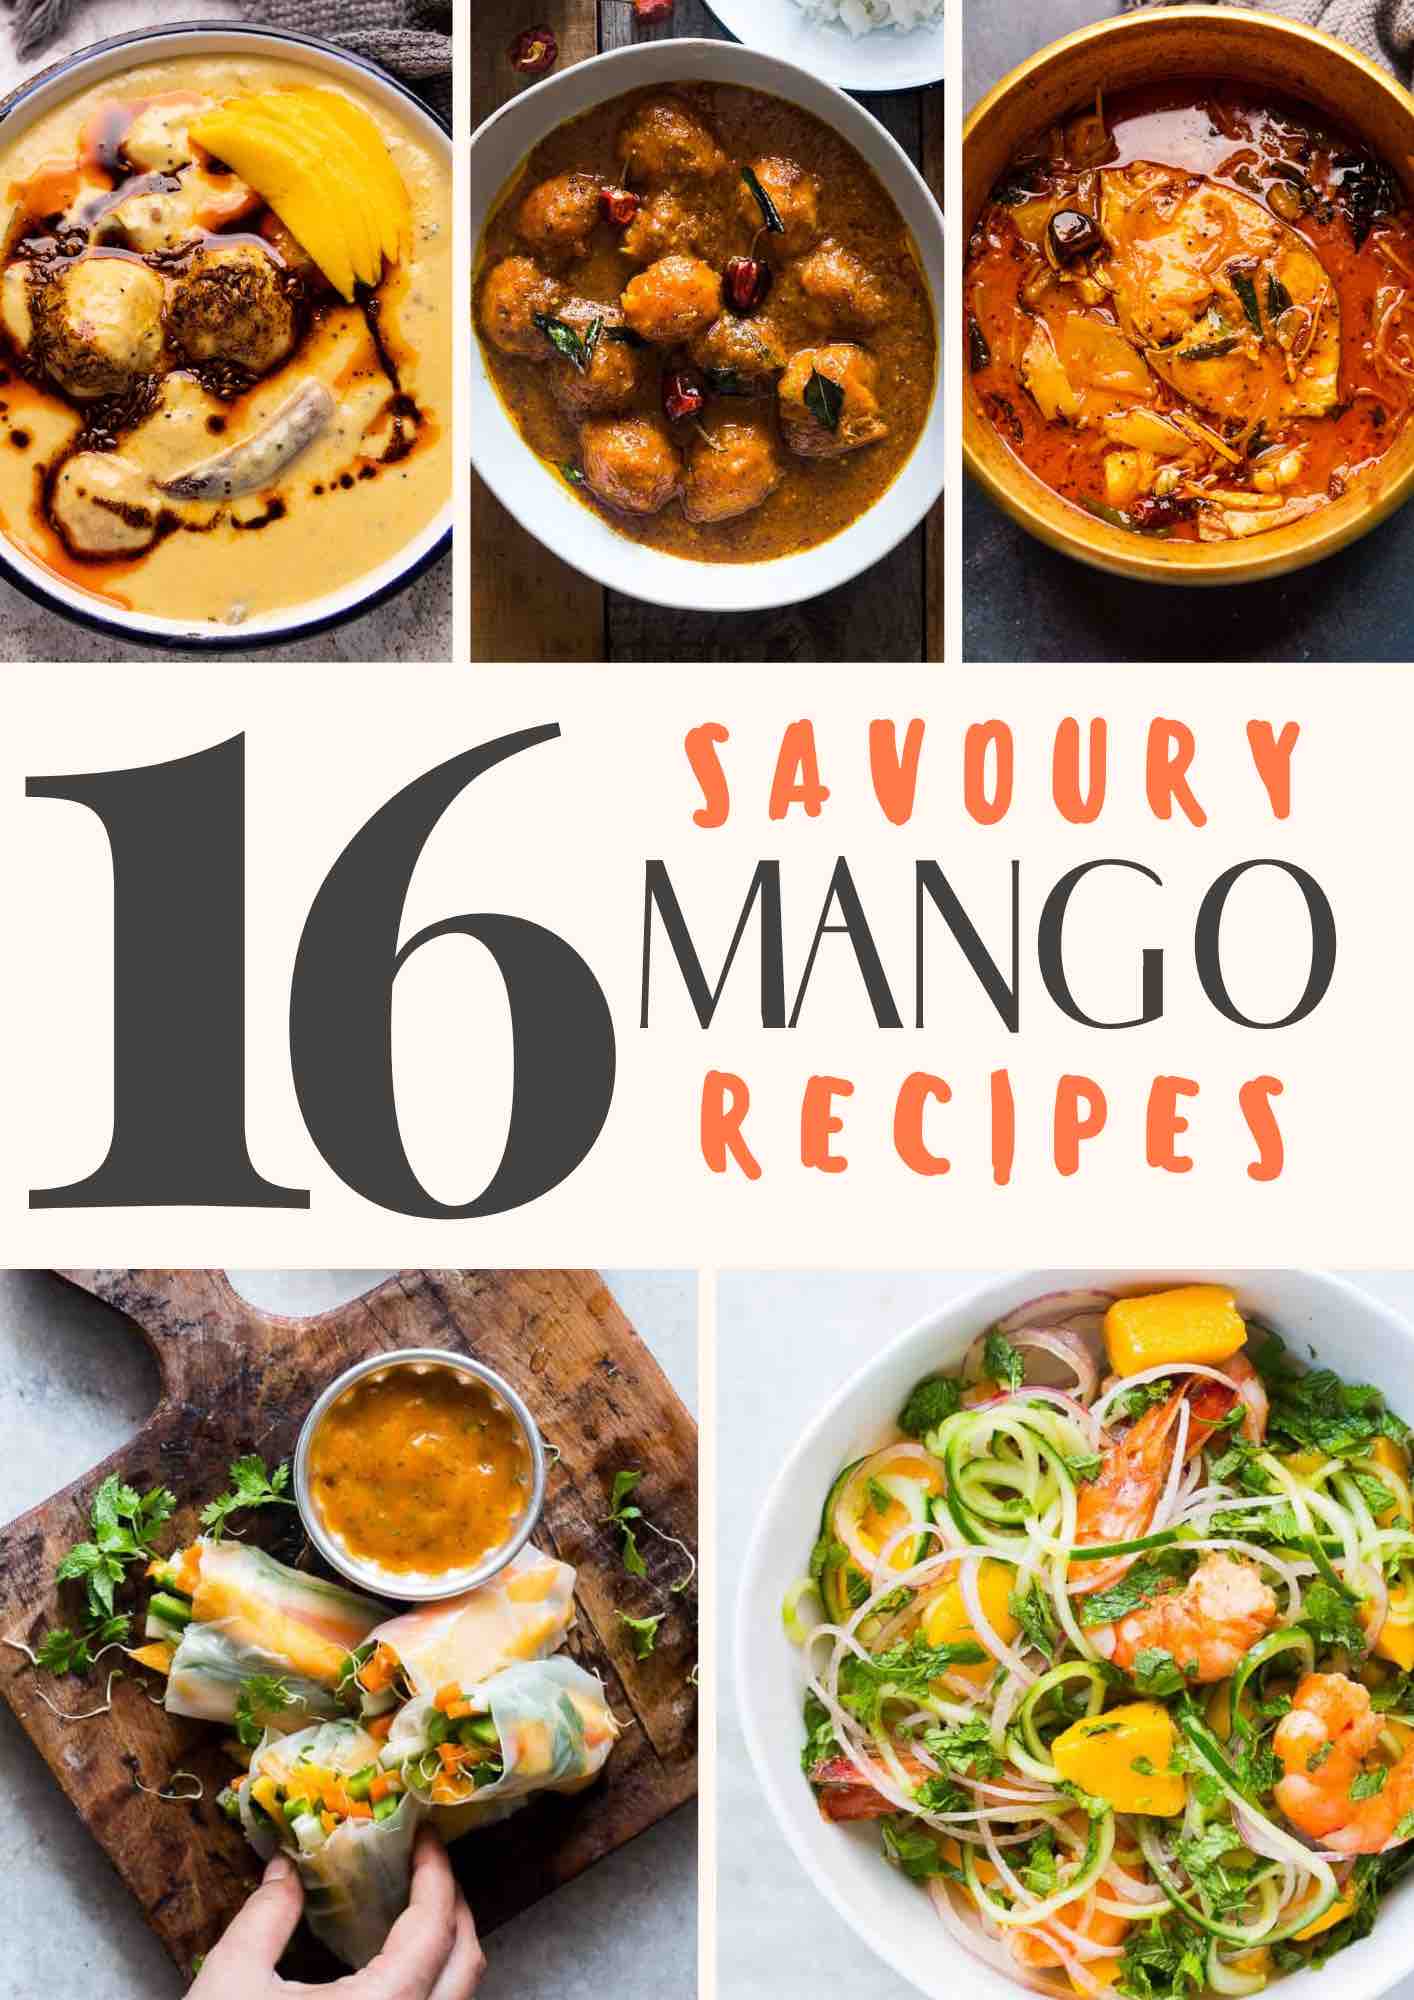 Picture collage depicting five amazing savoury mango recipes with a text overlay